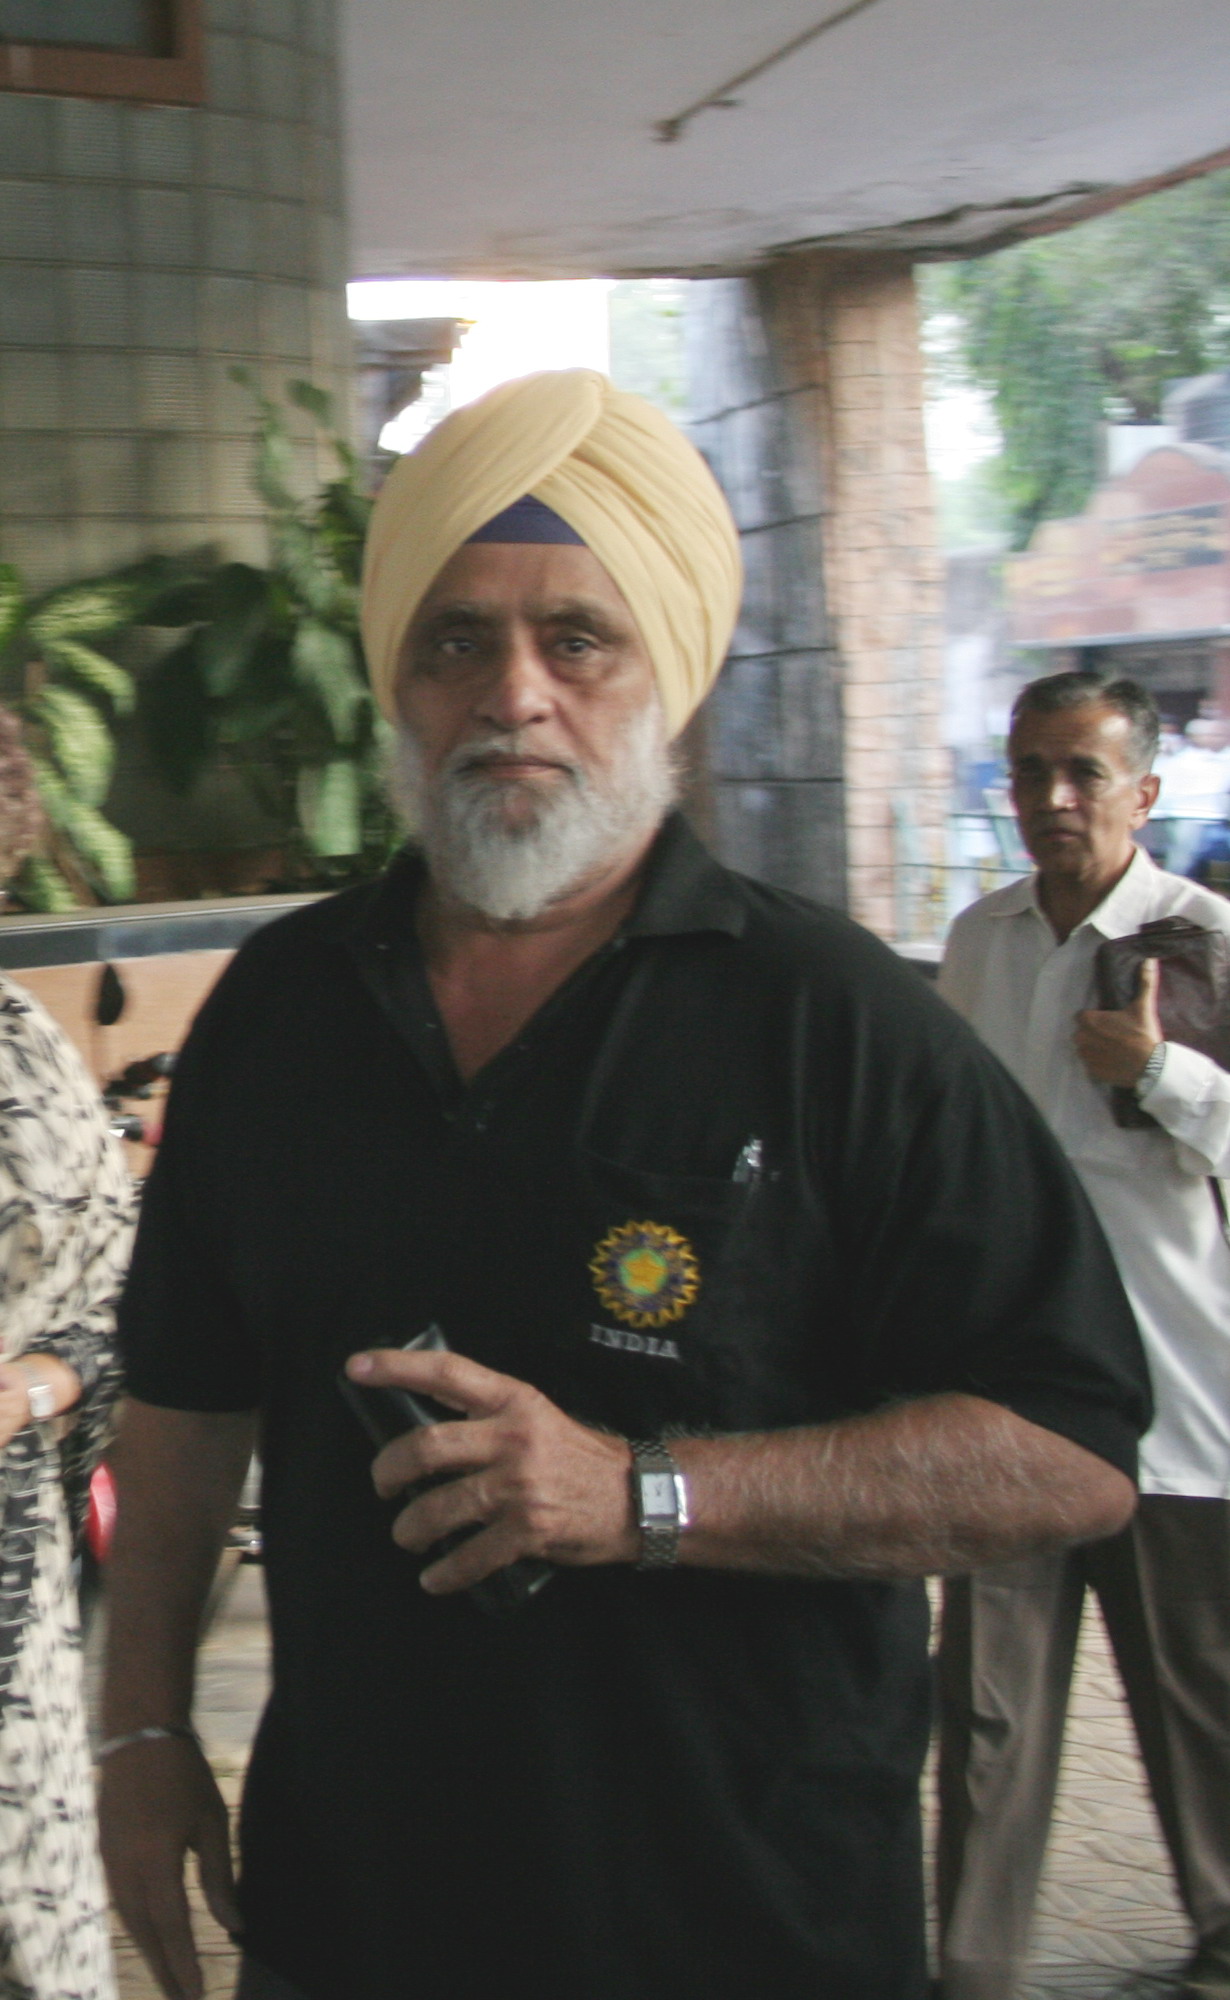 Current Indian team has average cricketers boring fruits in shadow of some excellent players, says Bishan Singh Bedi